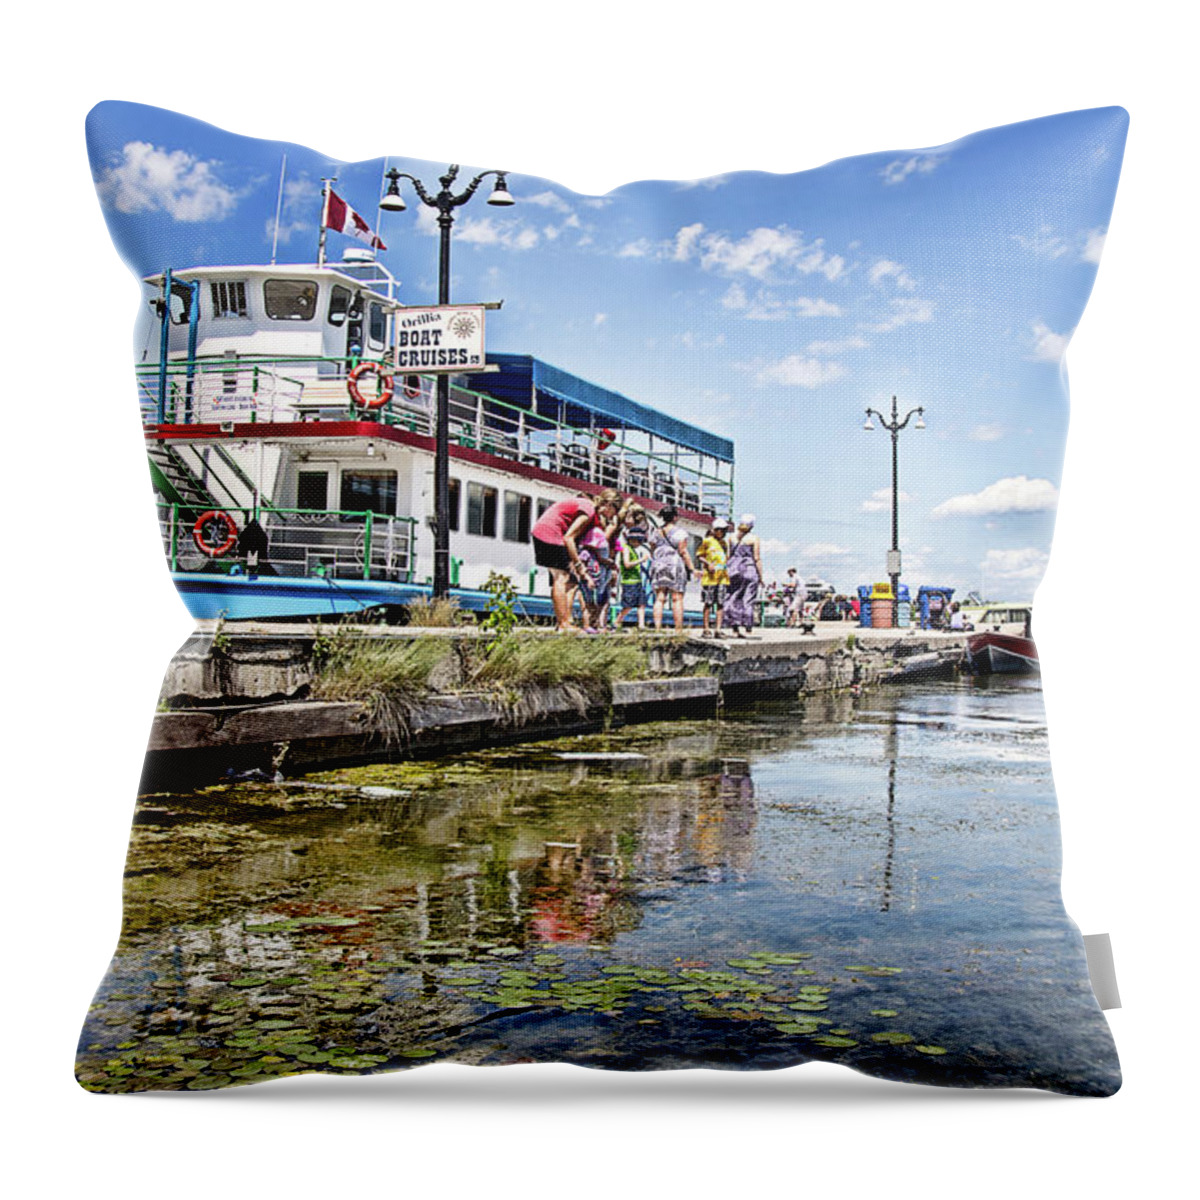 Orillia Throw Pillow featuring the digital art Island Princess at Harbour Dock by JGracey Stinson